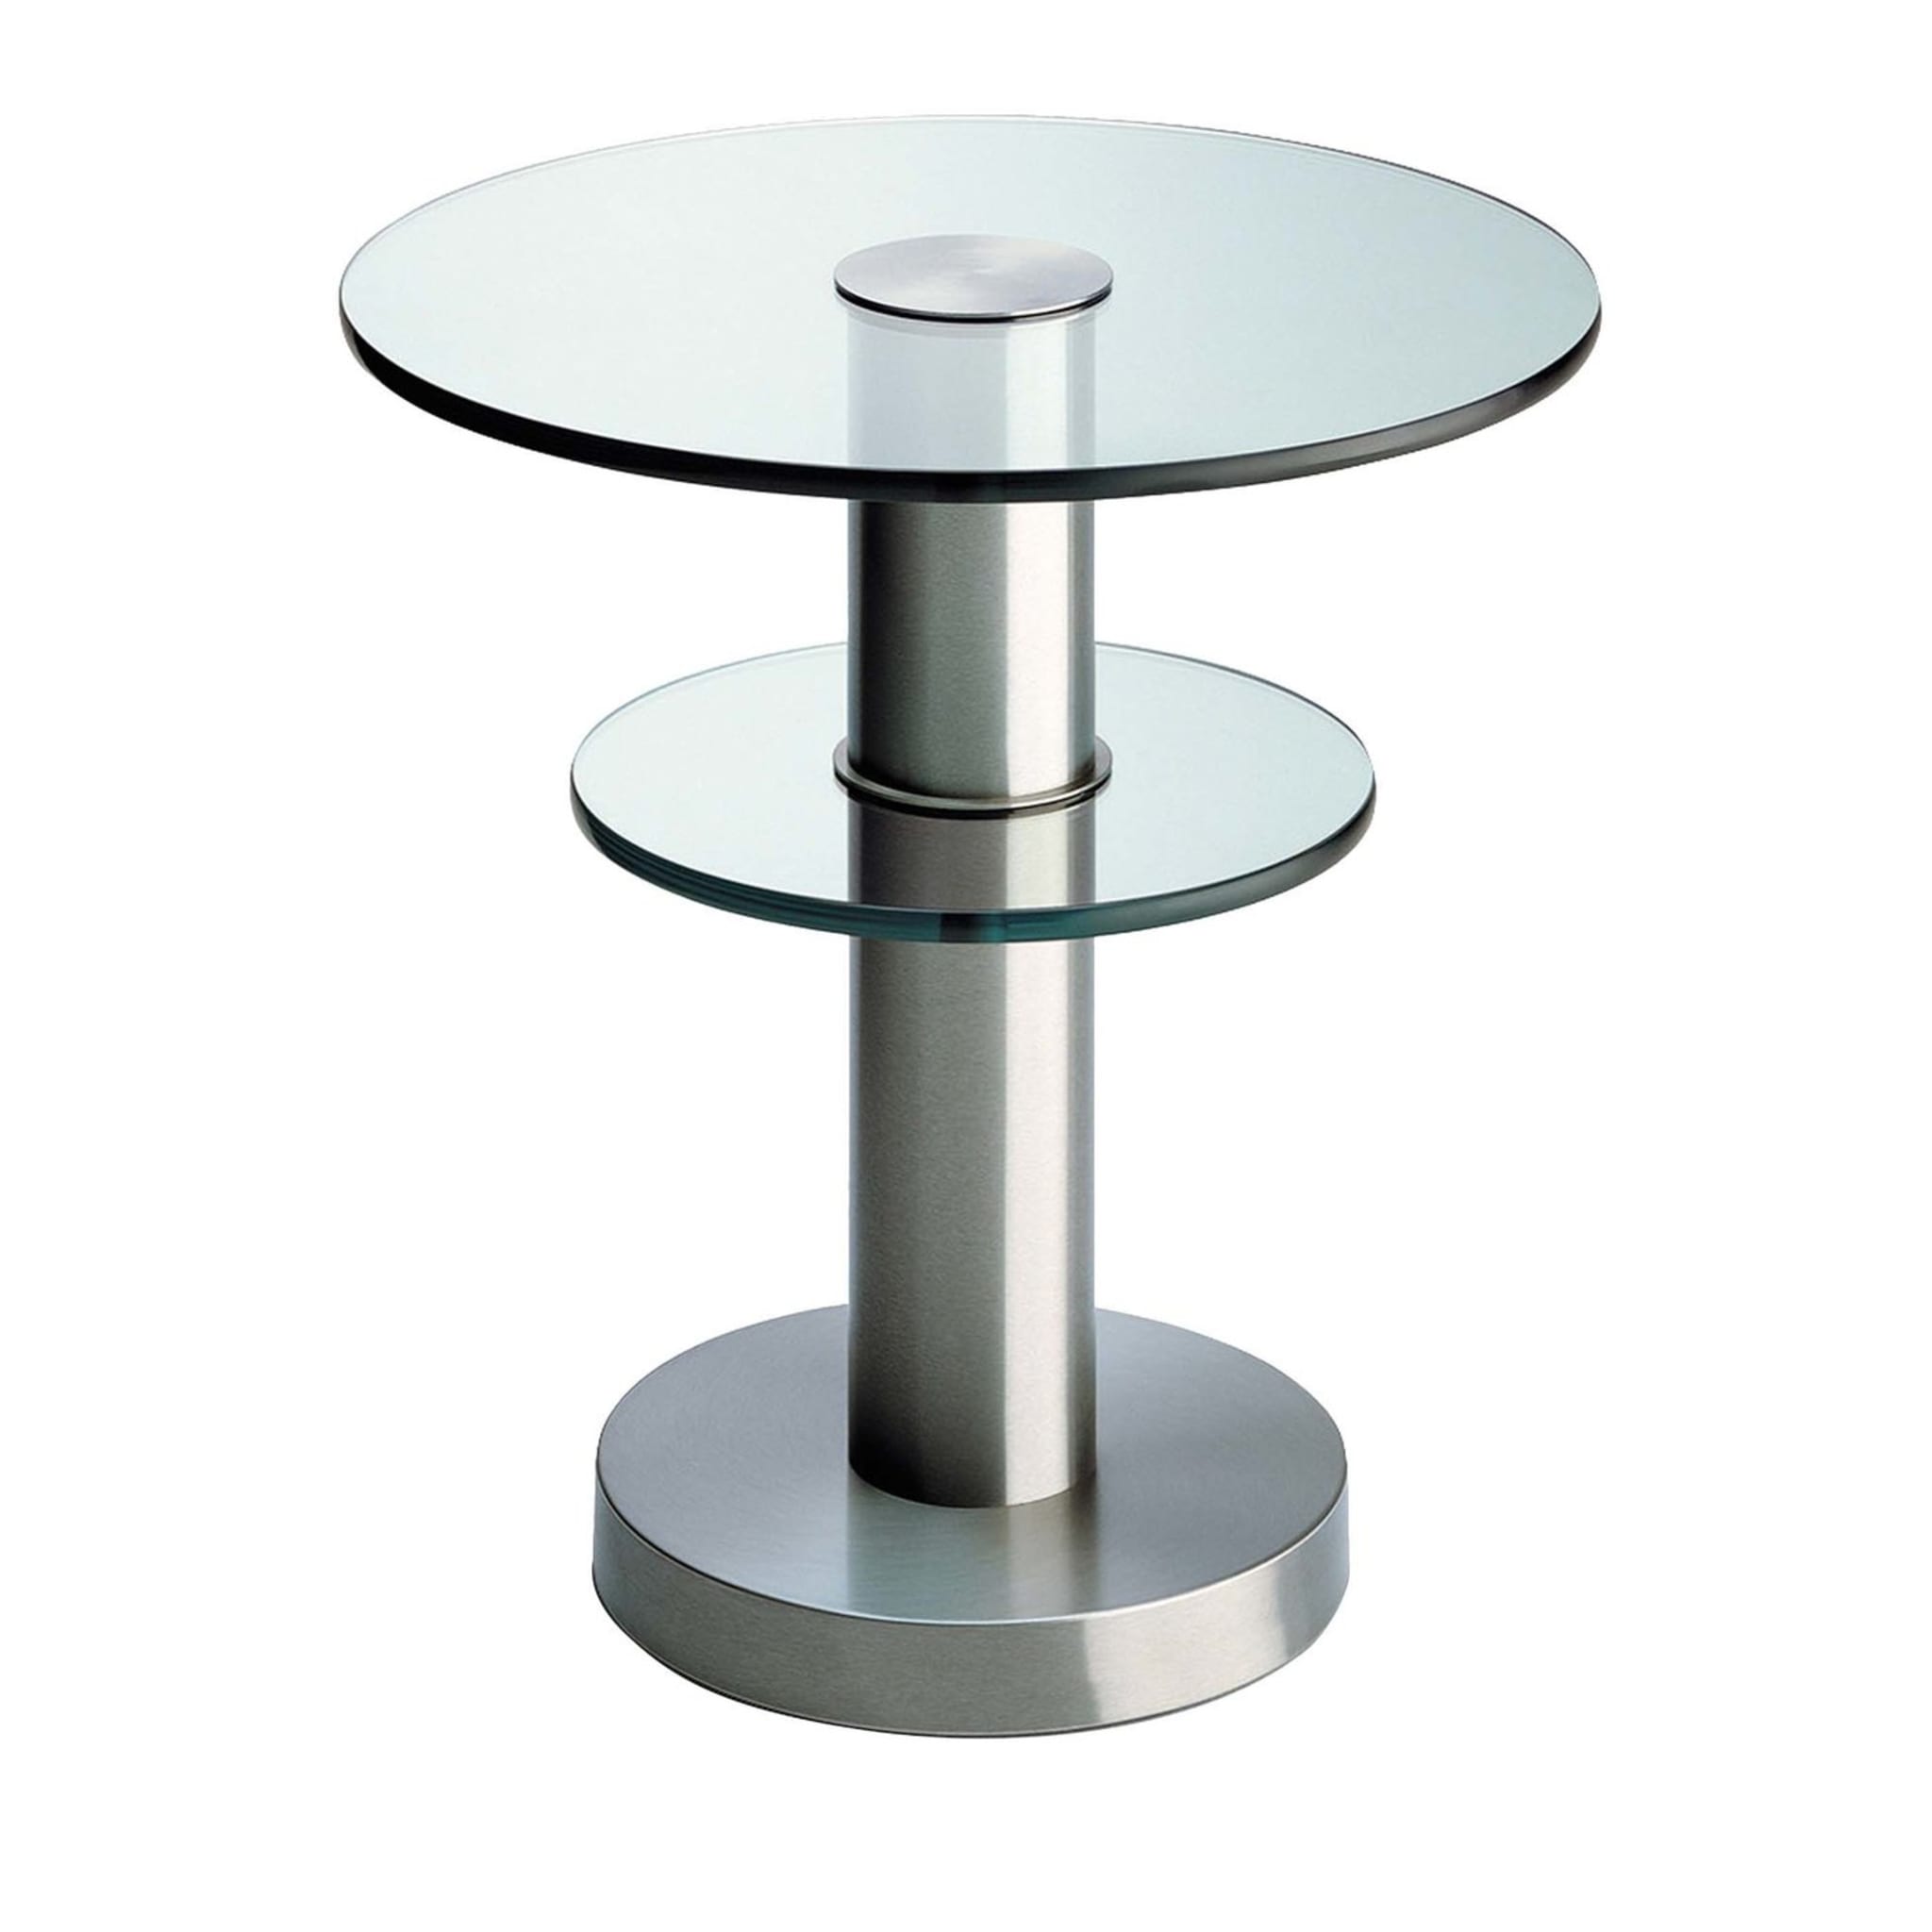 1932 Side Table by Gio Ponti - Main view